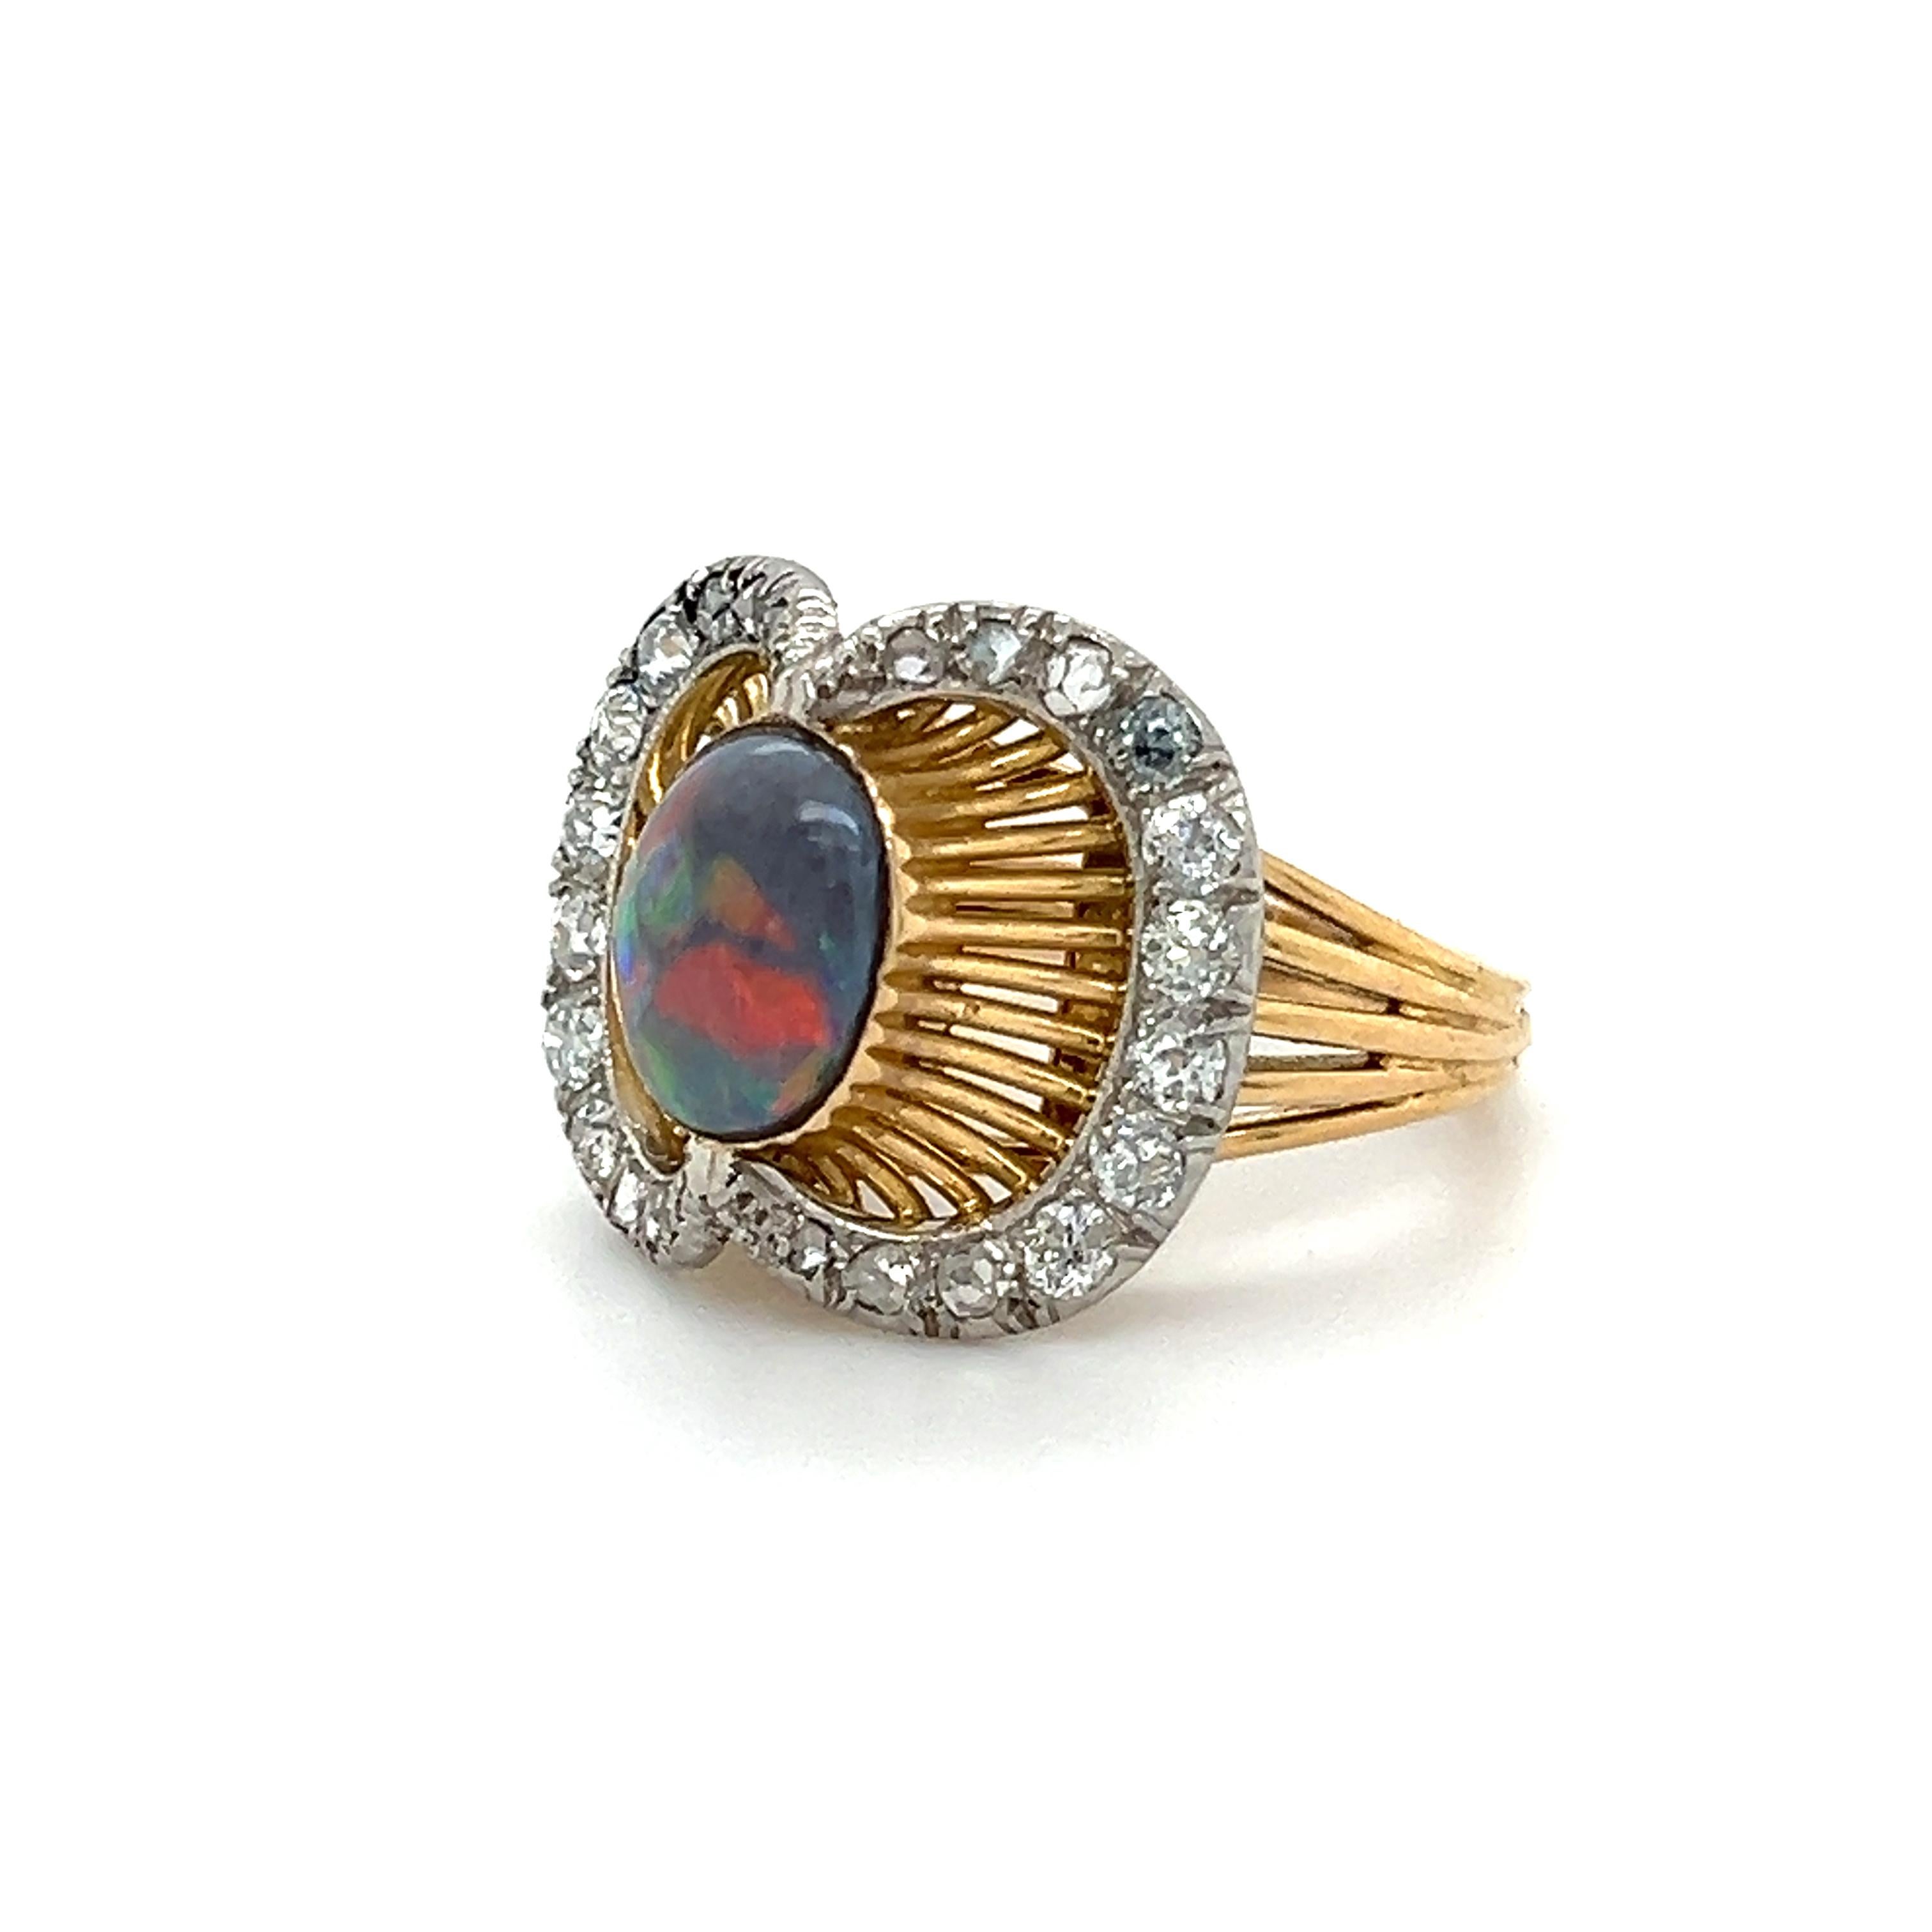 Stand out French Victorian era ring crafted in both platinum and 18k yellow gold. The ring highlights one black opal gemstone. The opal is bezel set and engulfed by a unique cluster of old mined cut diamonds.  Golden wire work forms a bridge that